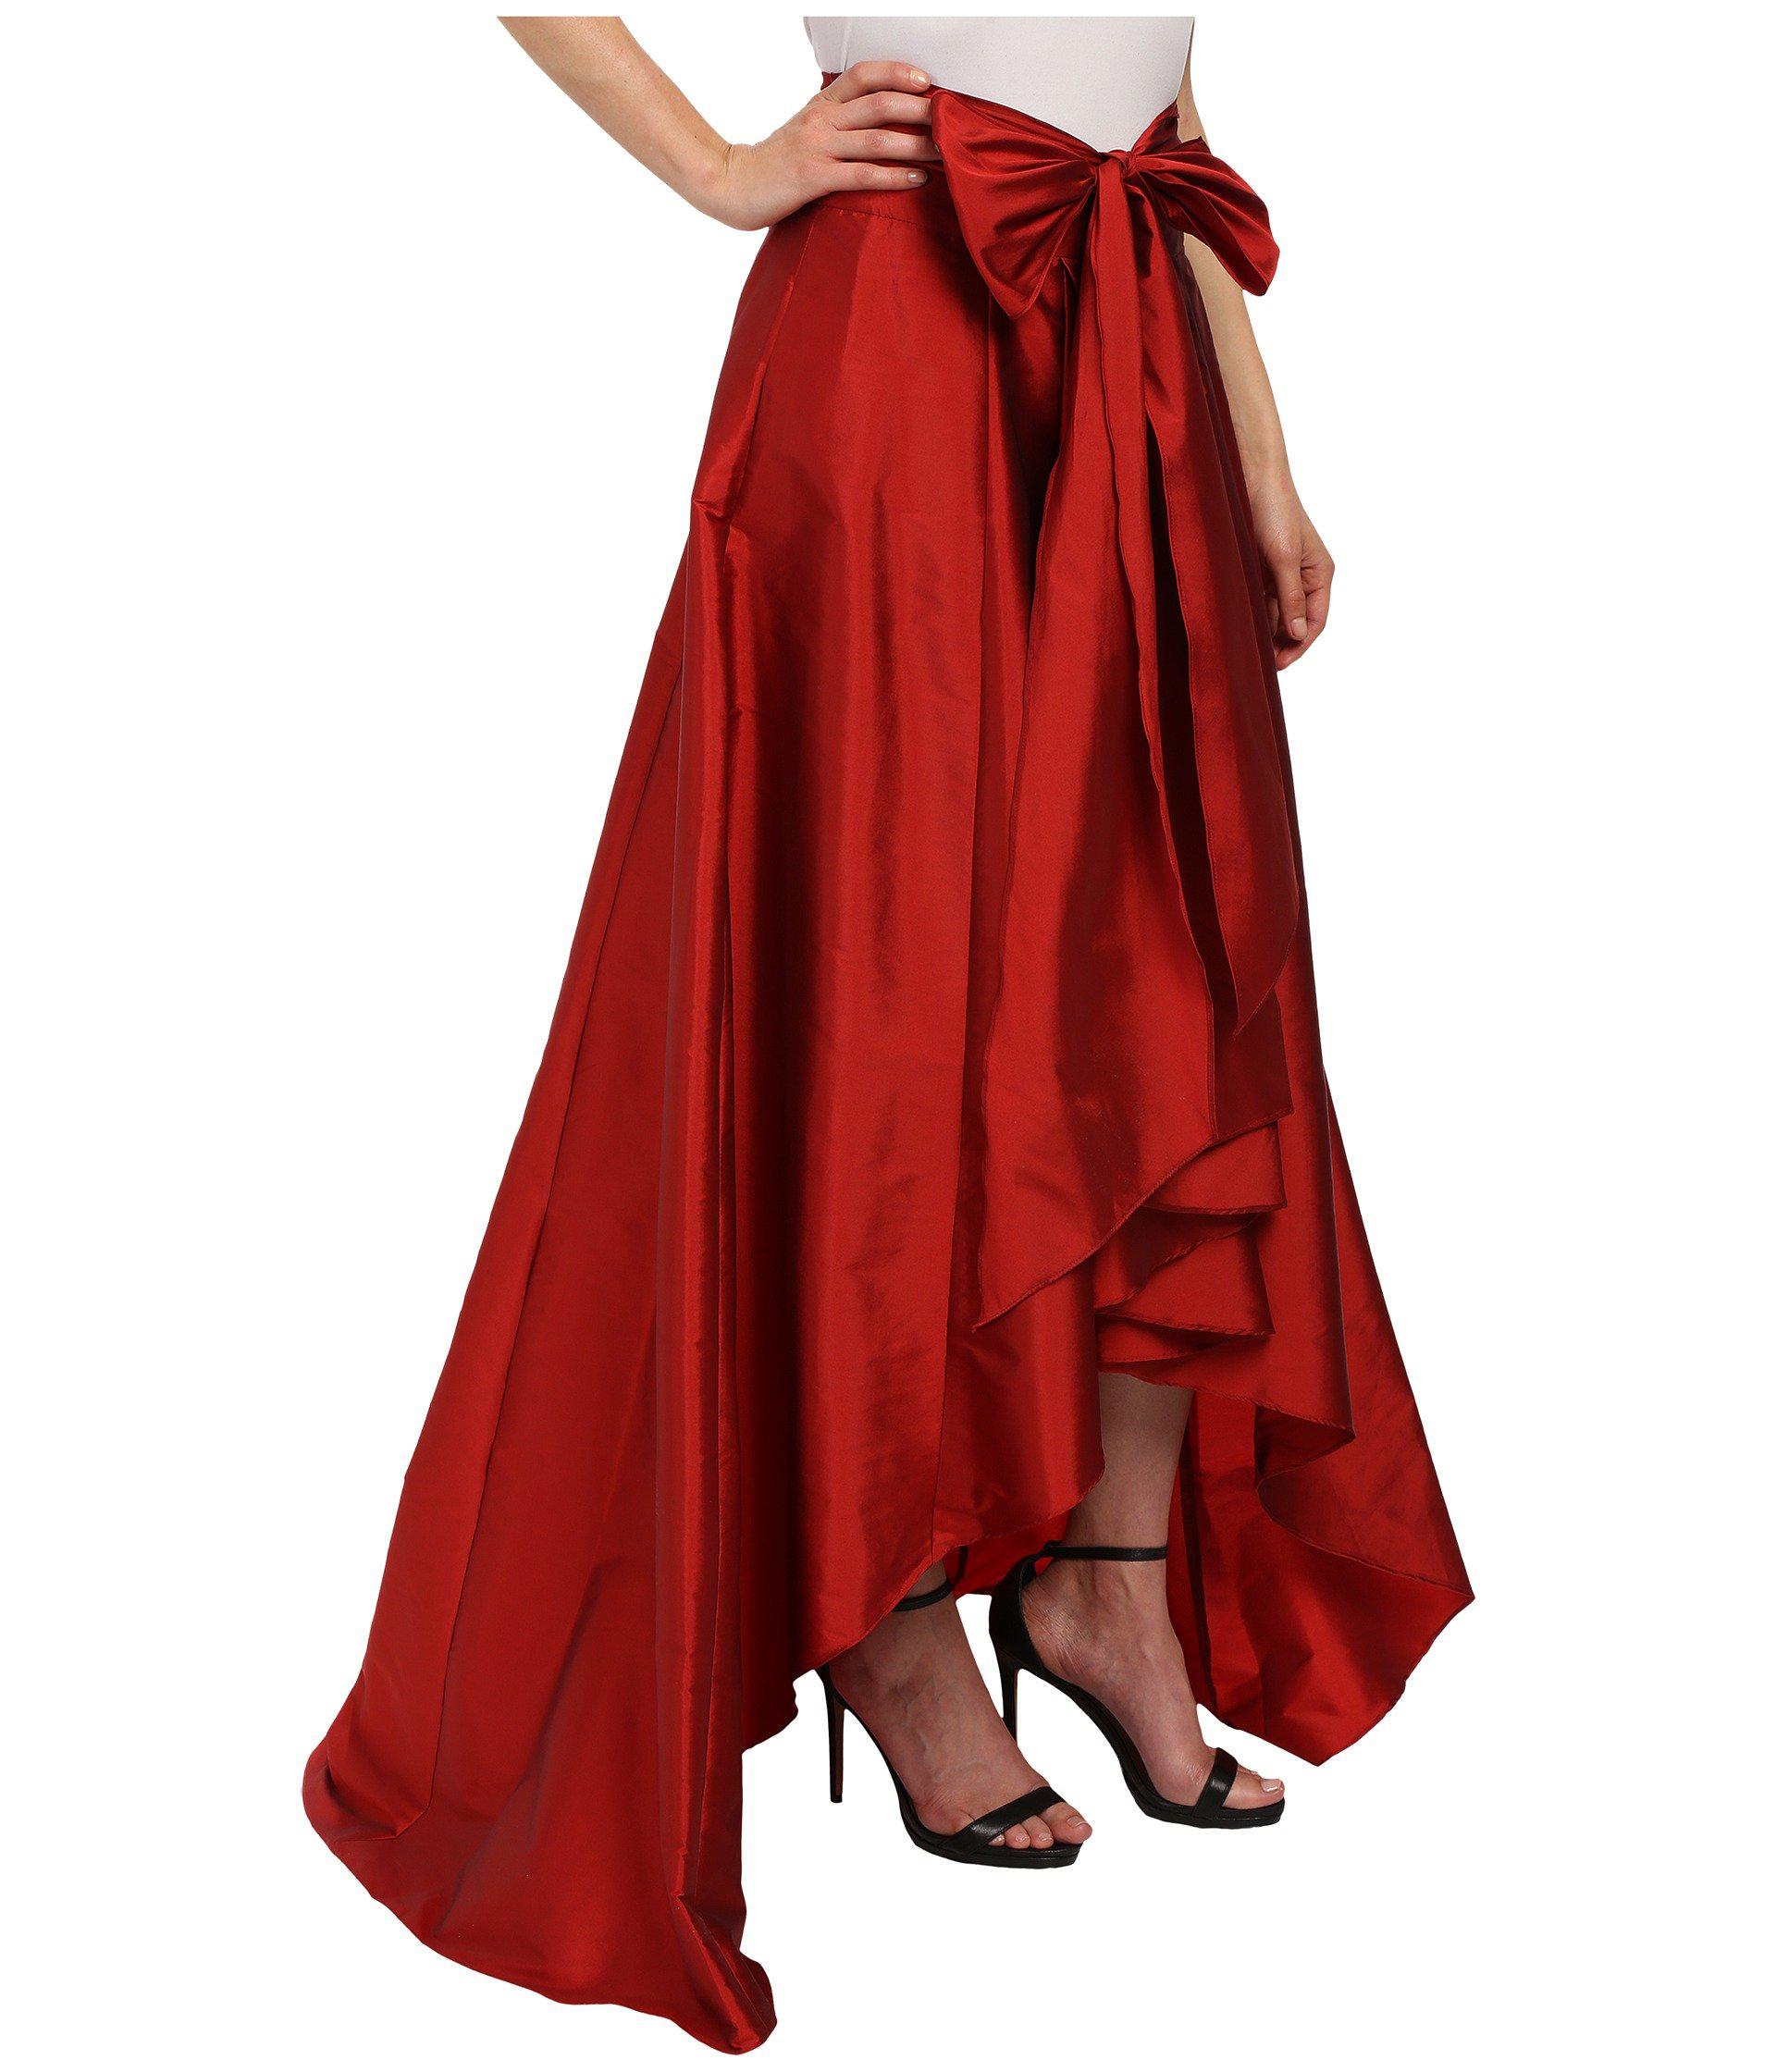 Lyst - Adrianna Papell High-low Ball Skirt in Red